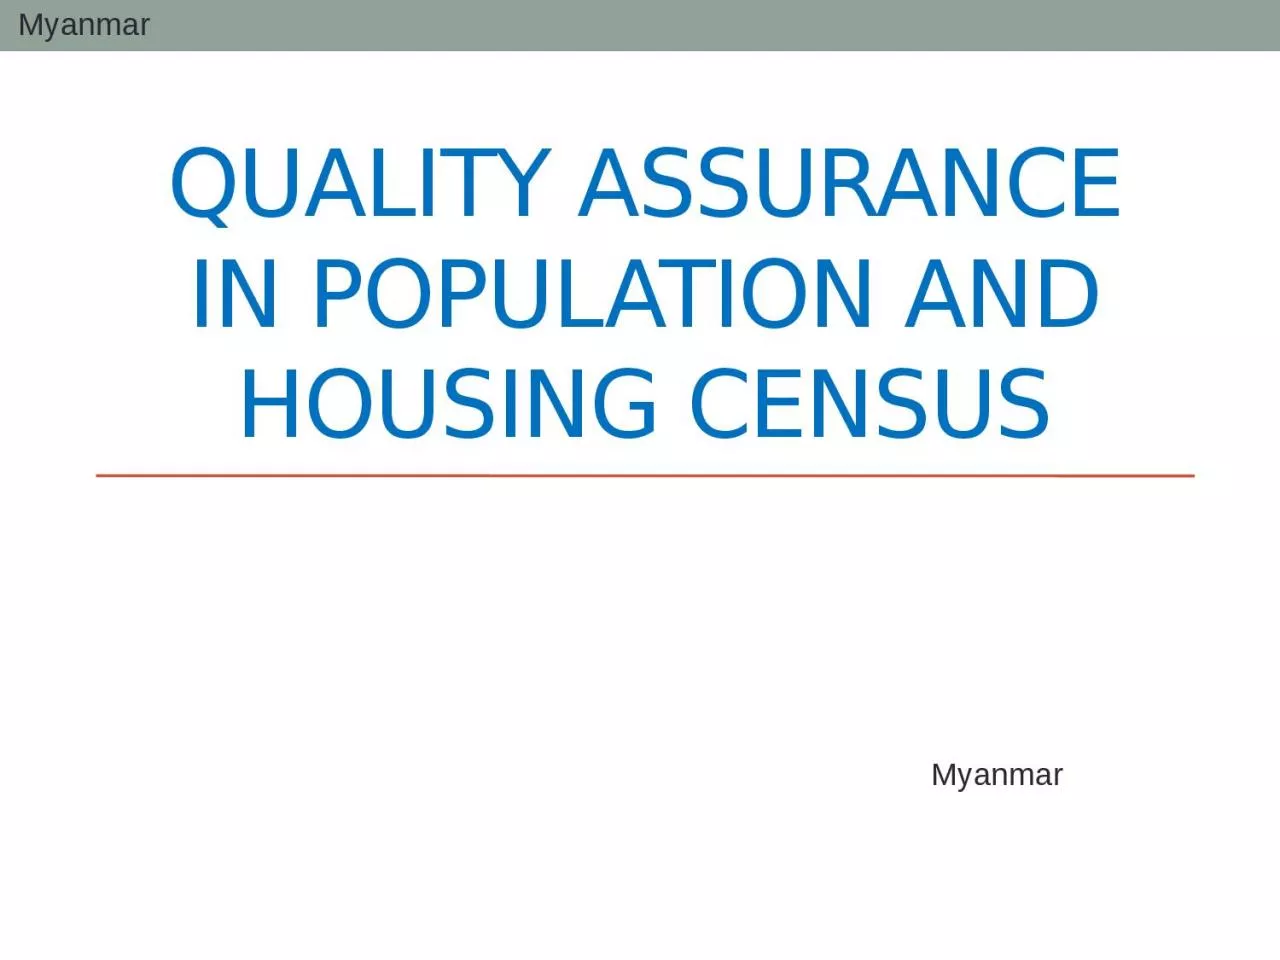 Quality assurance in population and housing Census